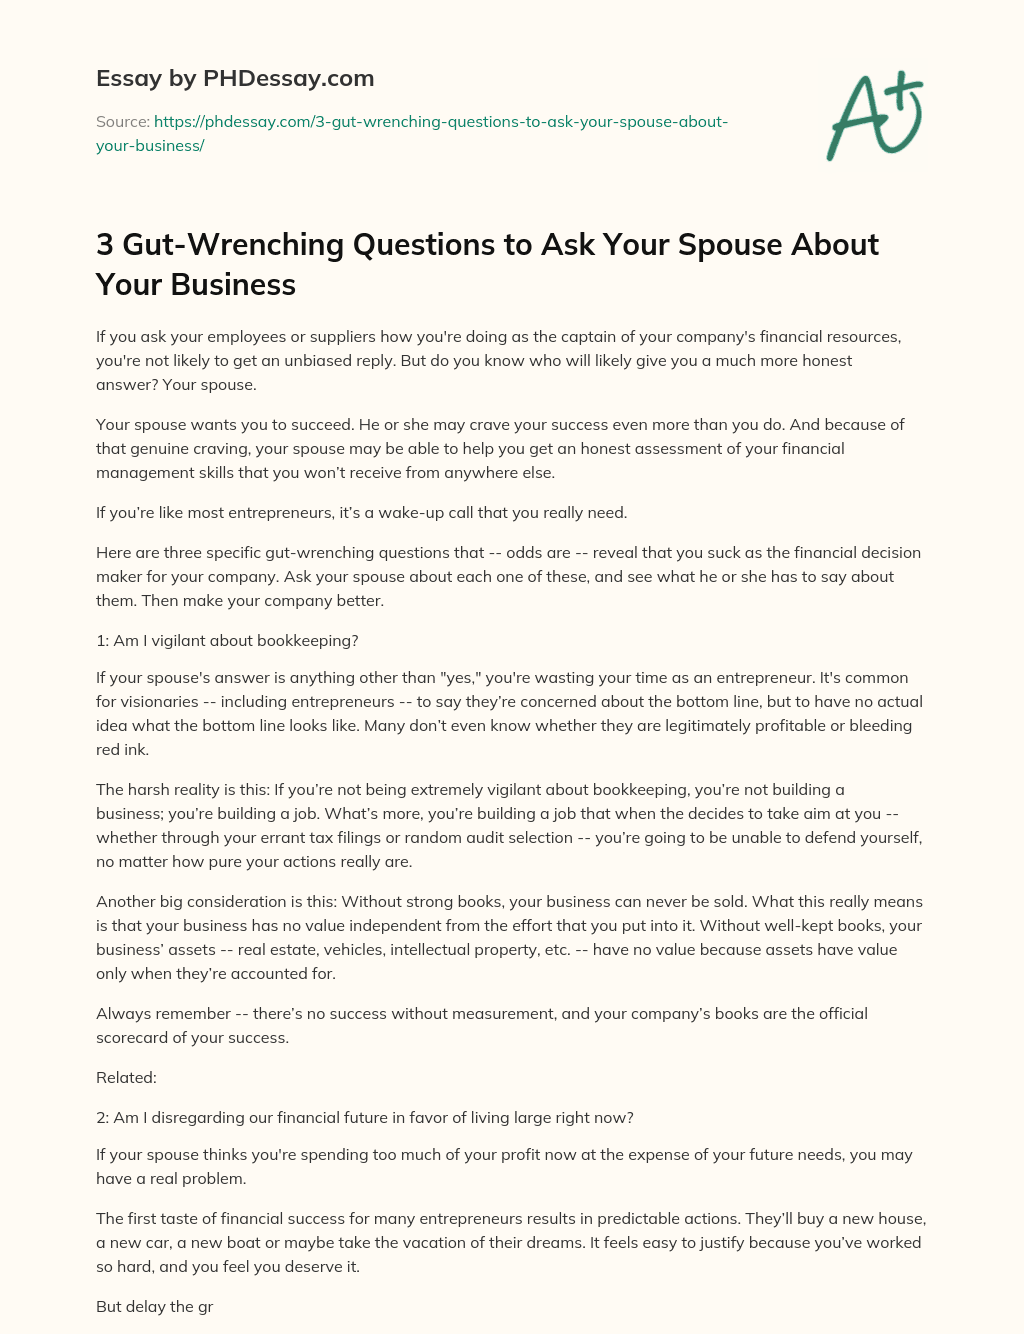 3 Gut-Wrenching Questions to Ask Your Spouse About Your Business essay